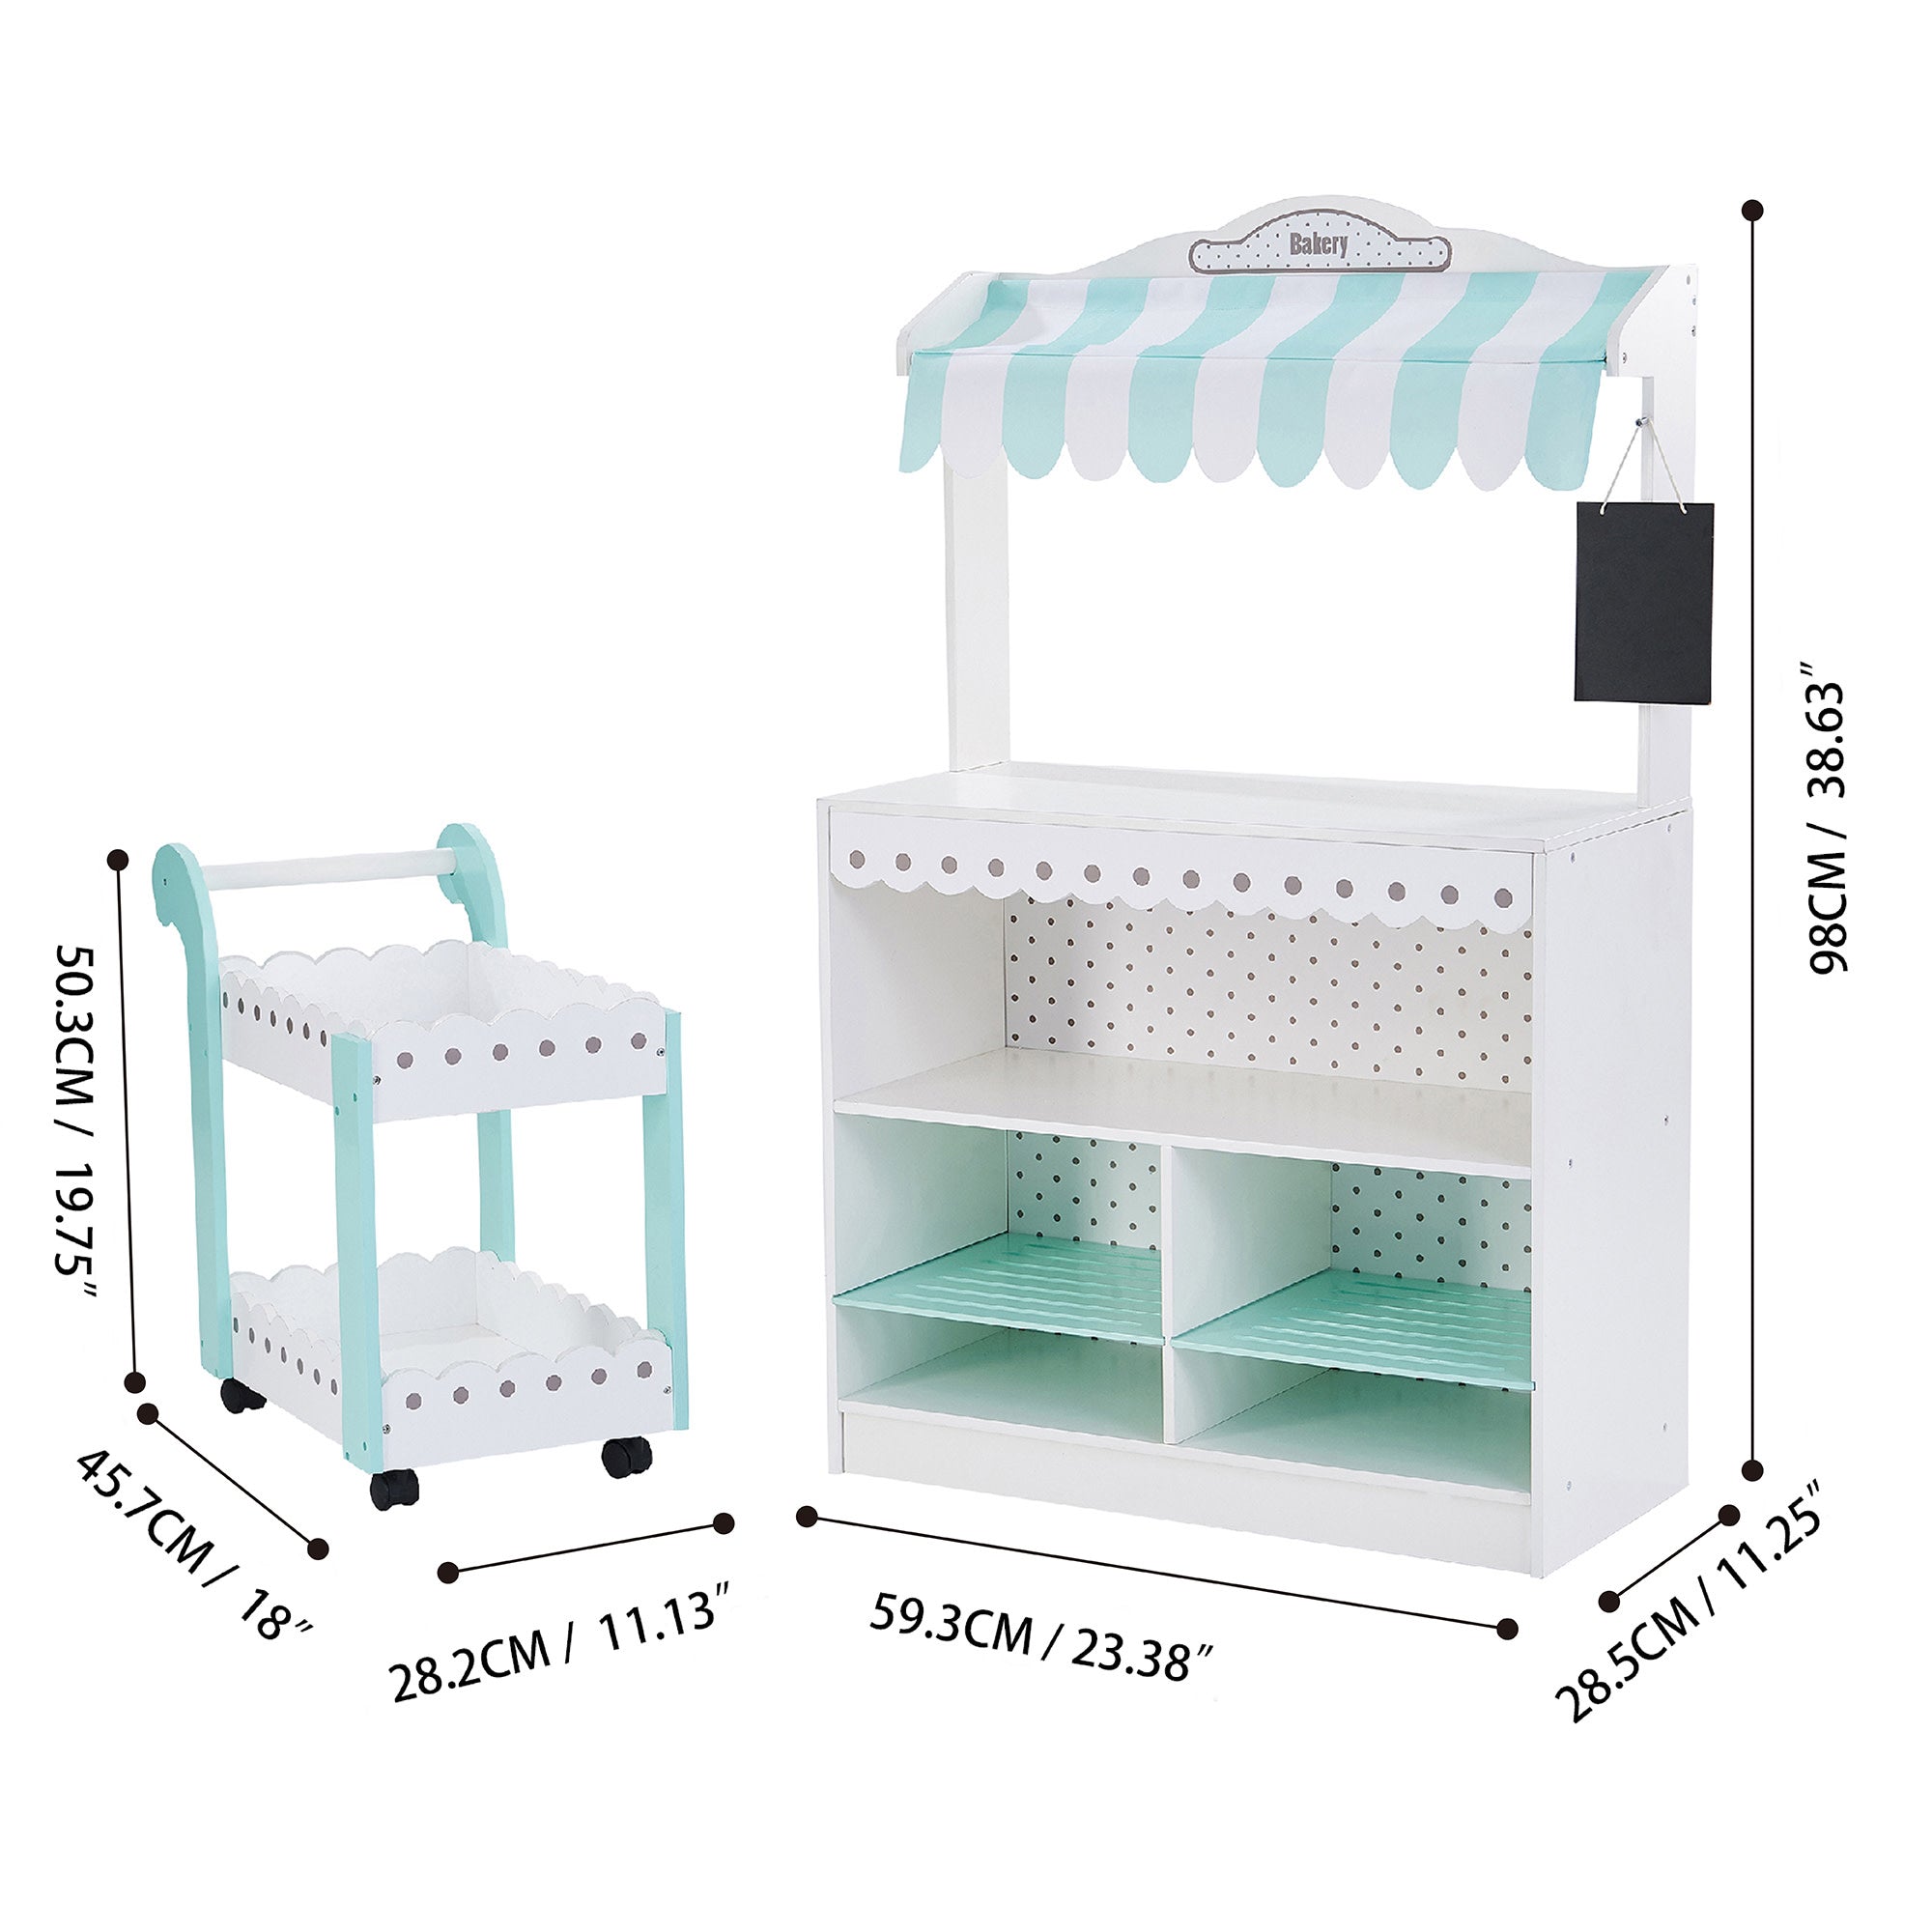 Teamson Kids My Dream Bakery Shop, Treat Stand and Dessert Cart, White/Blue